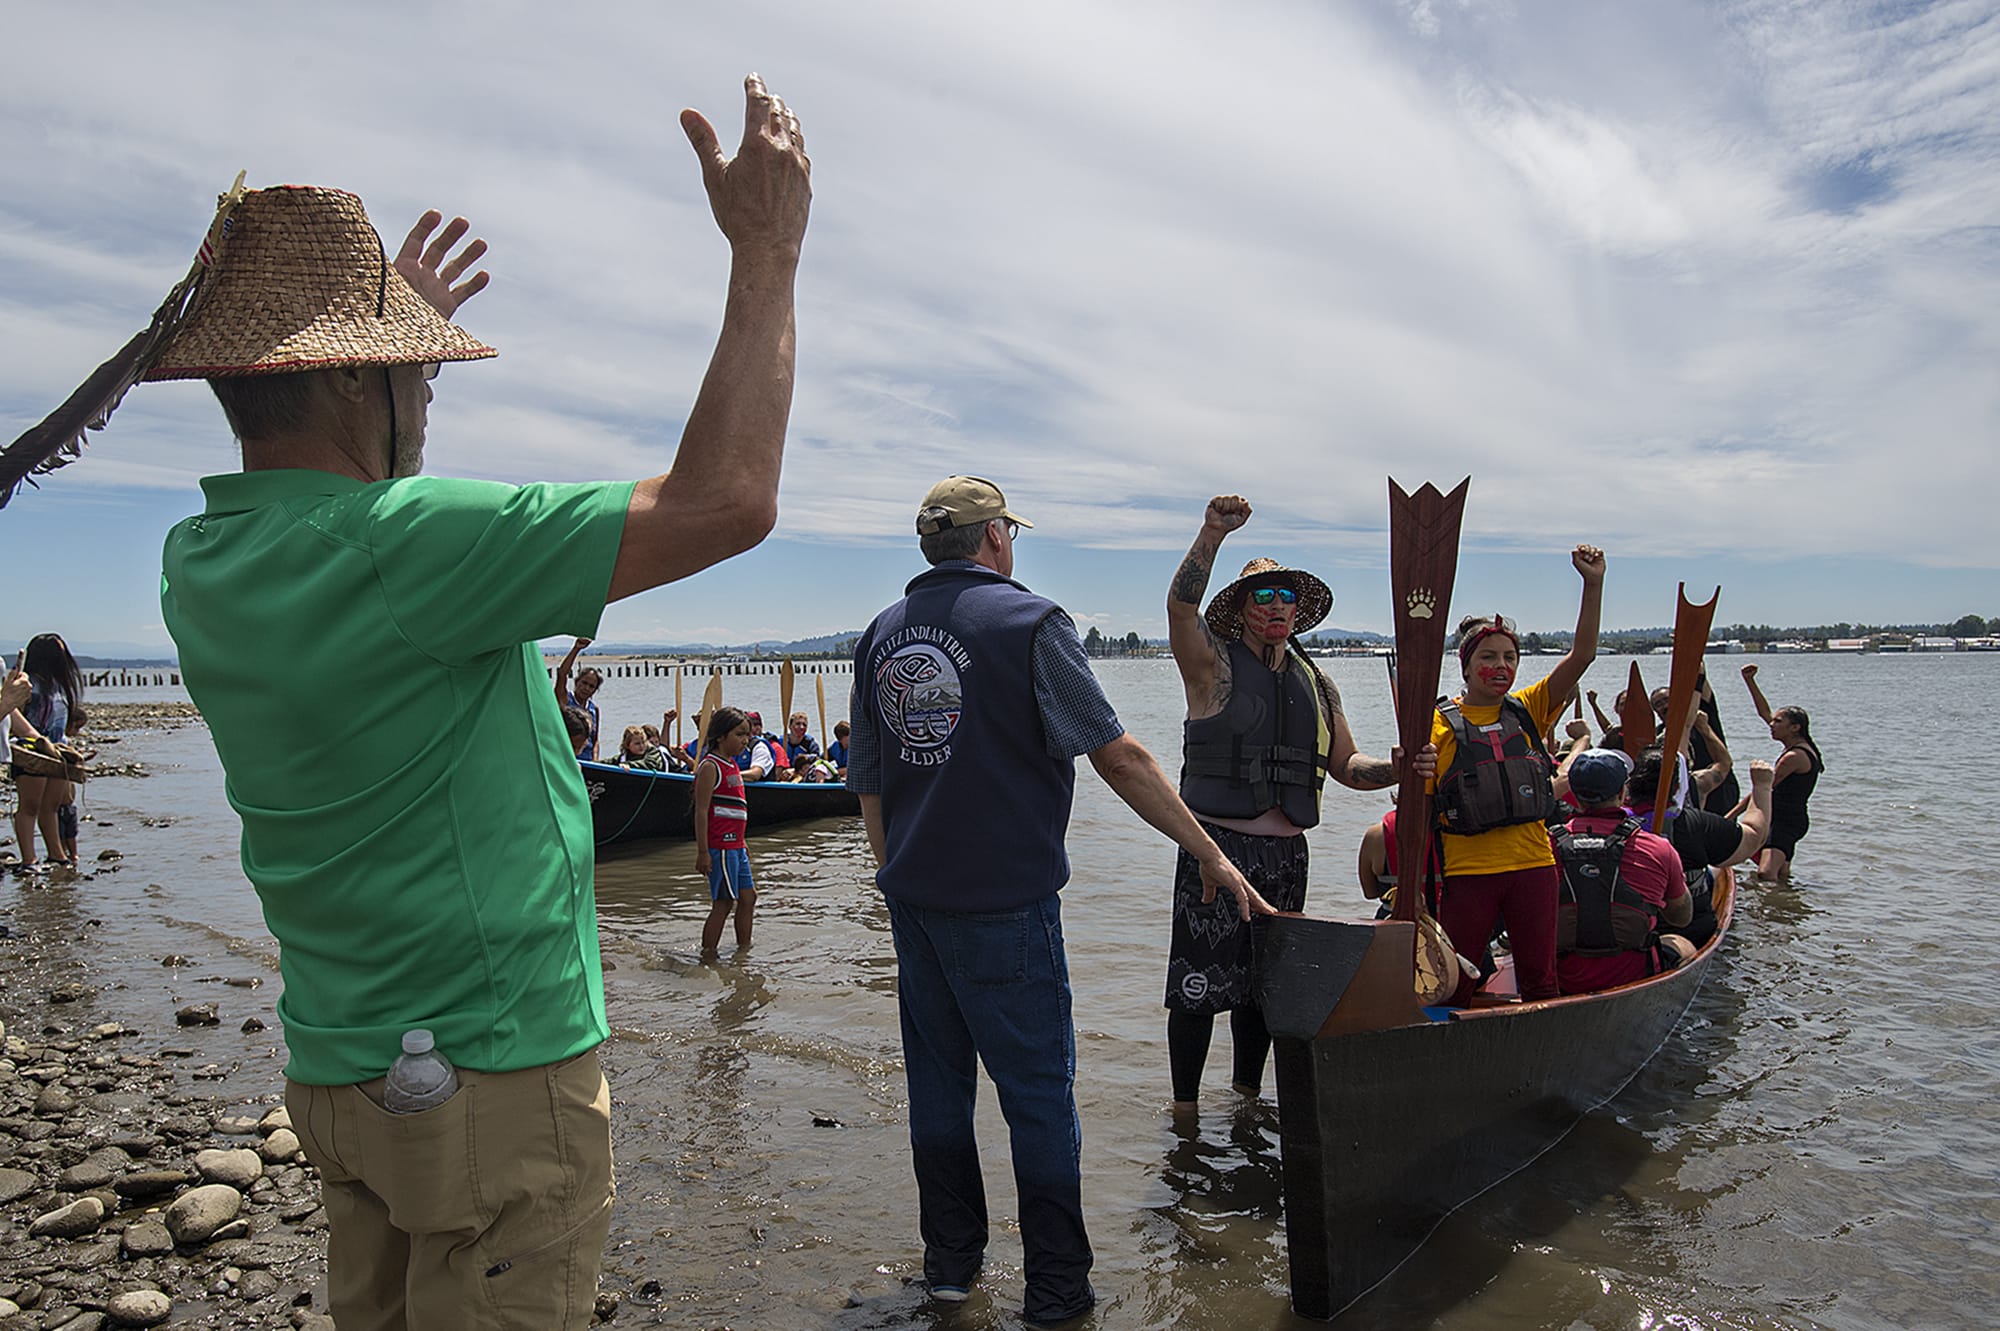 Bill Iyall, left, chairman of the Cowlitz Tribe, welcomes members of the Portland All-Nations canoe family, right, as they arrive at Marine Park along with members of the Cowlitz Tribe, background left, on Friday afternoon, July 12, 2019. Participants, who started in Camas, came out to raise awareness for indigenous missing and murdered women. "We have to have a voice for those who are unable to speak," Iyall said.